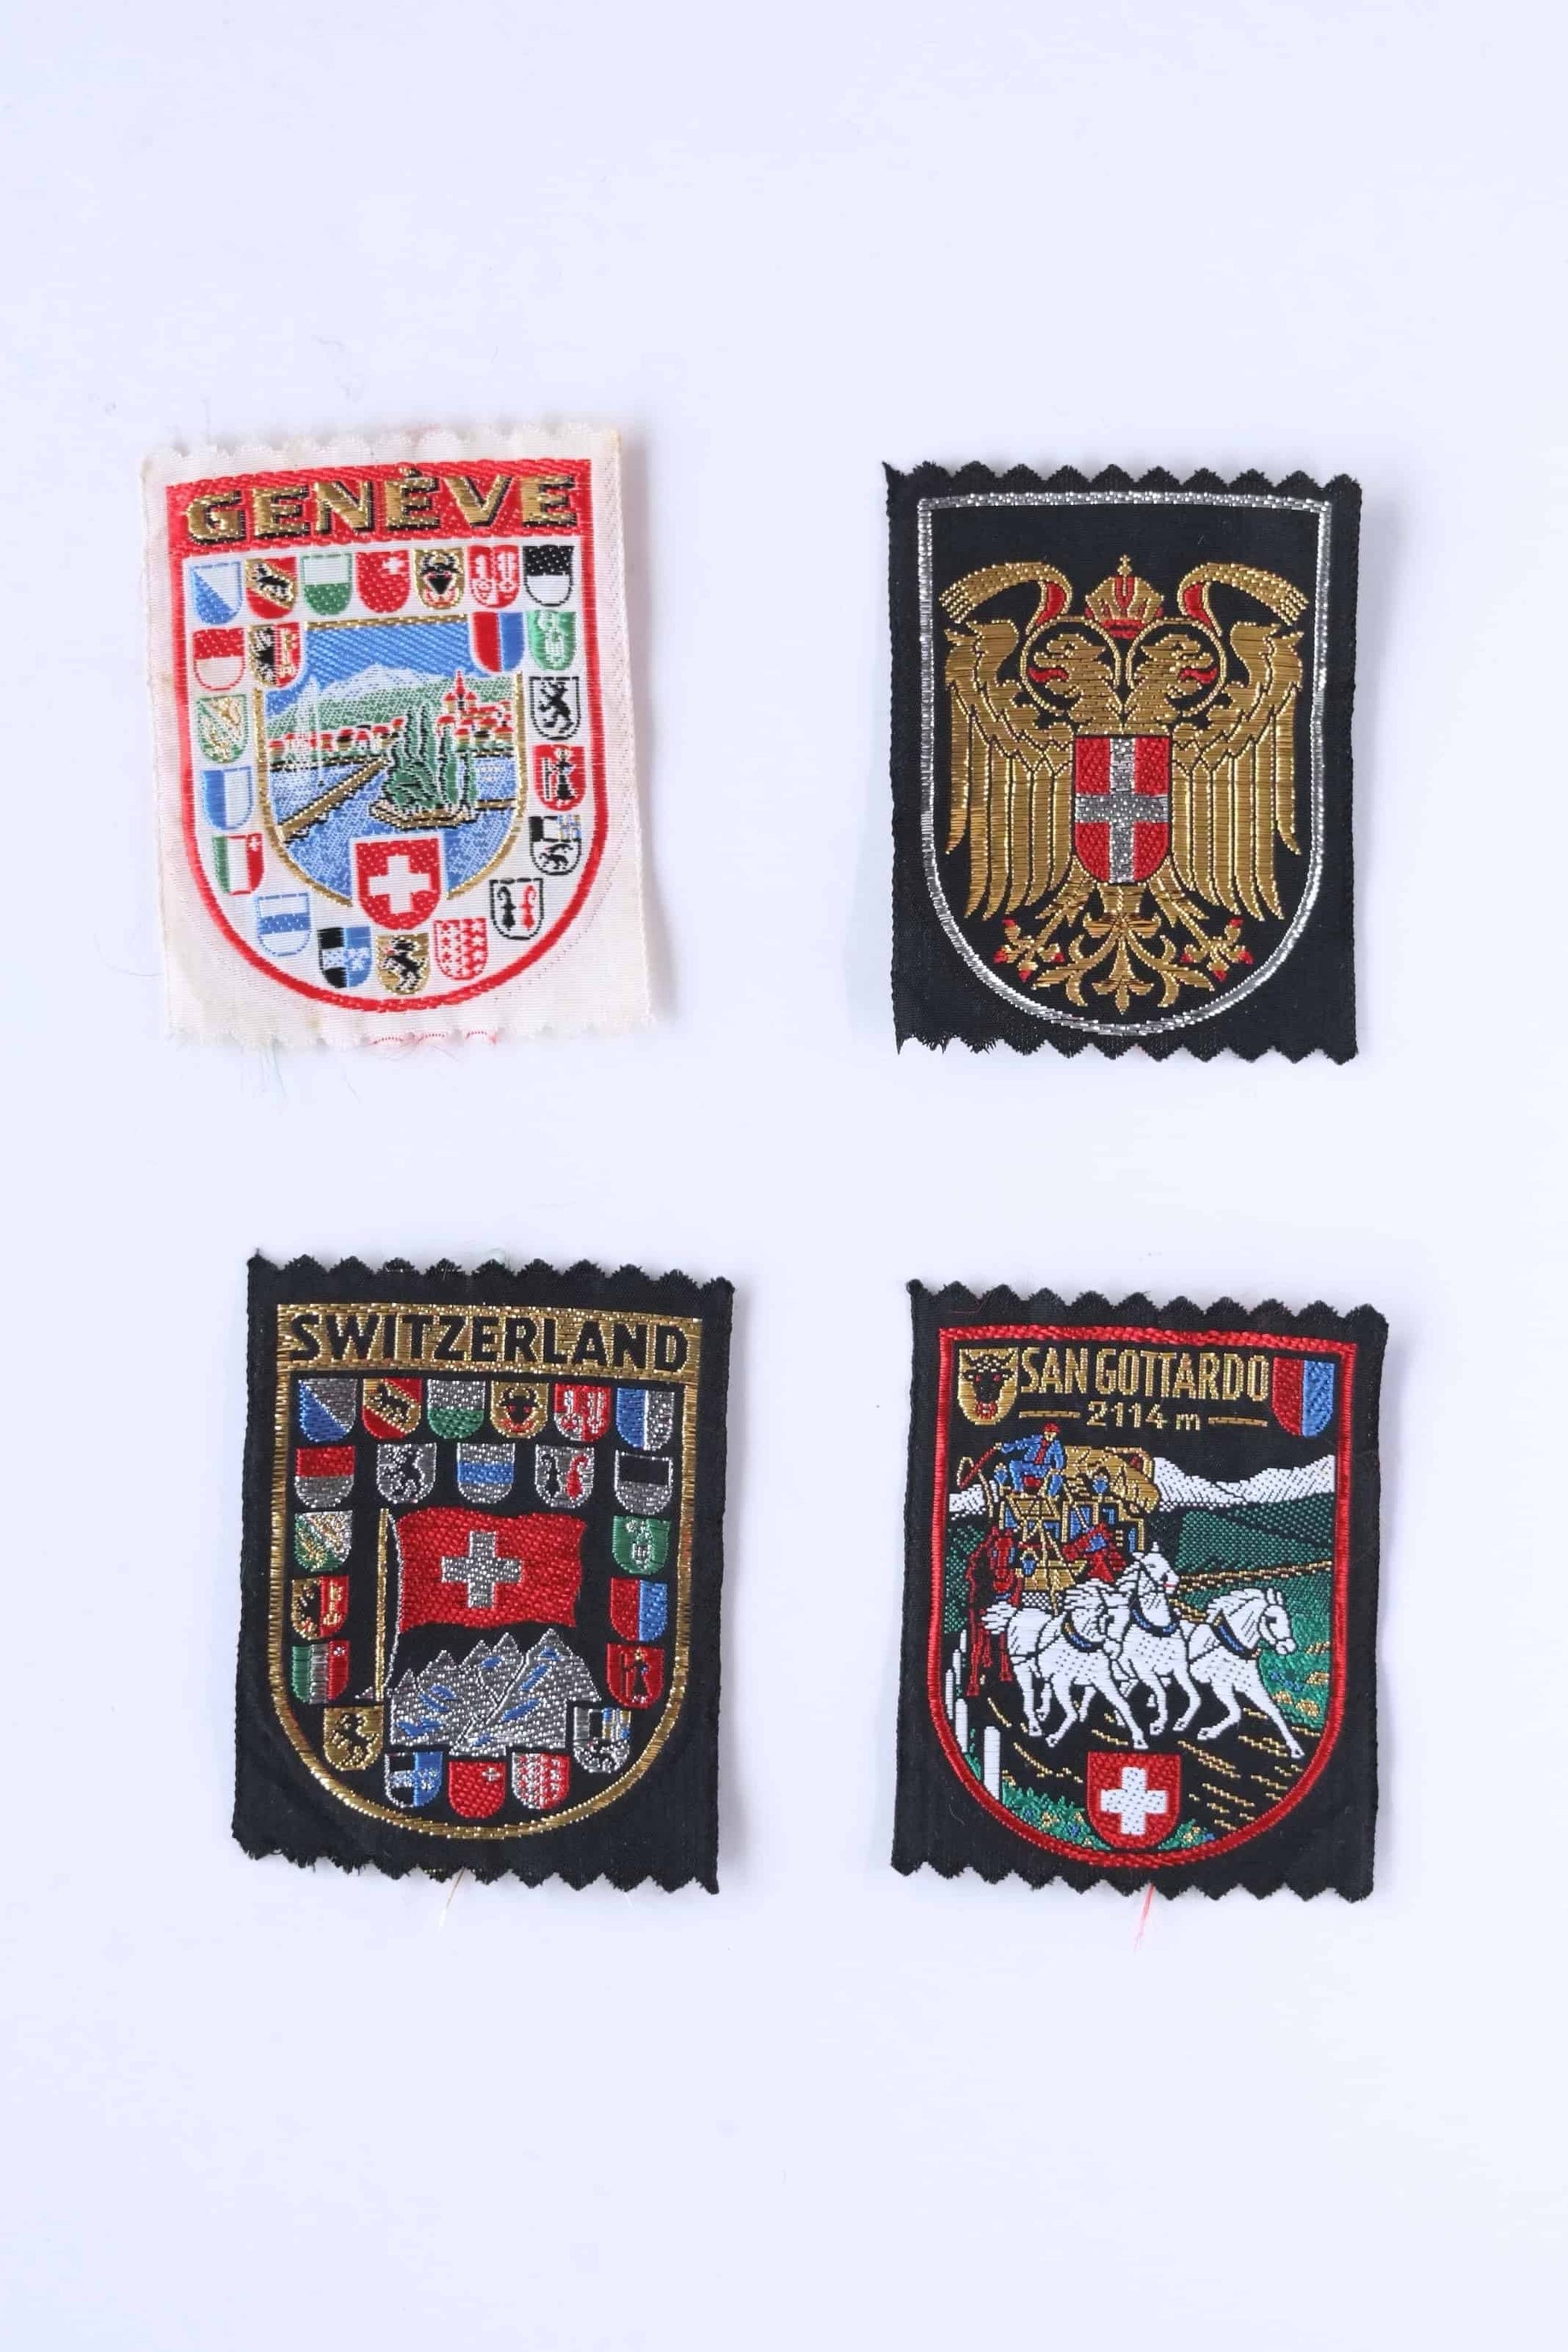 Travel Clothes Patches - Embroidered Patches Clothing Badges T